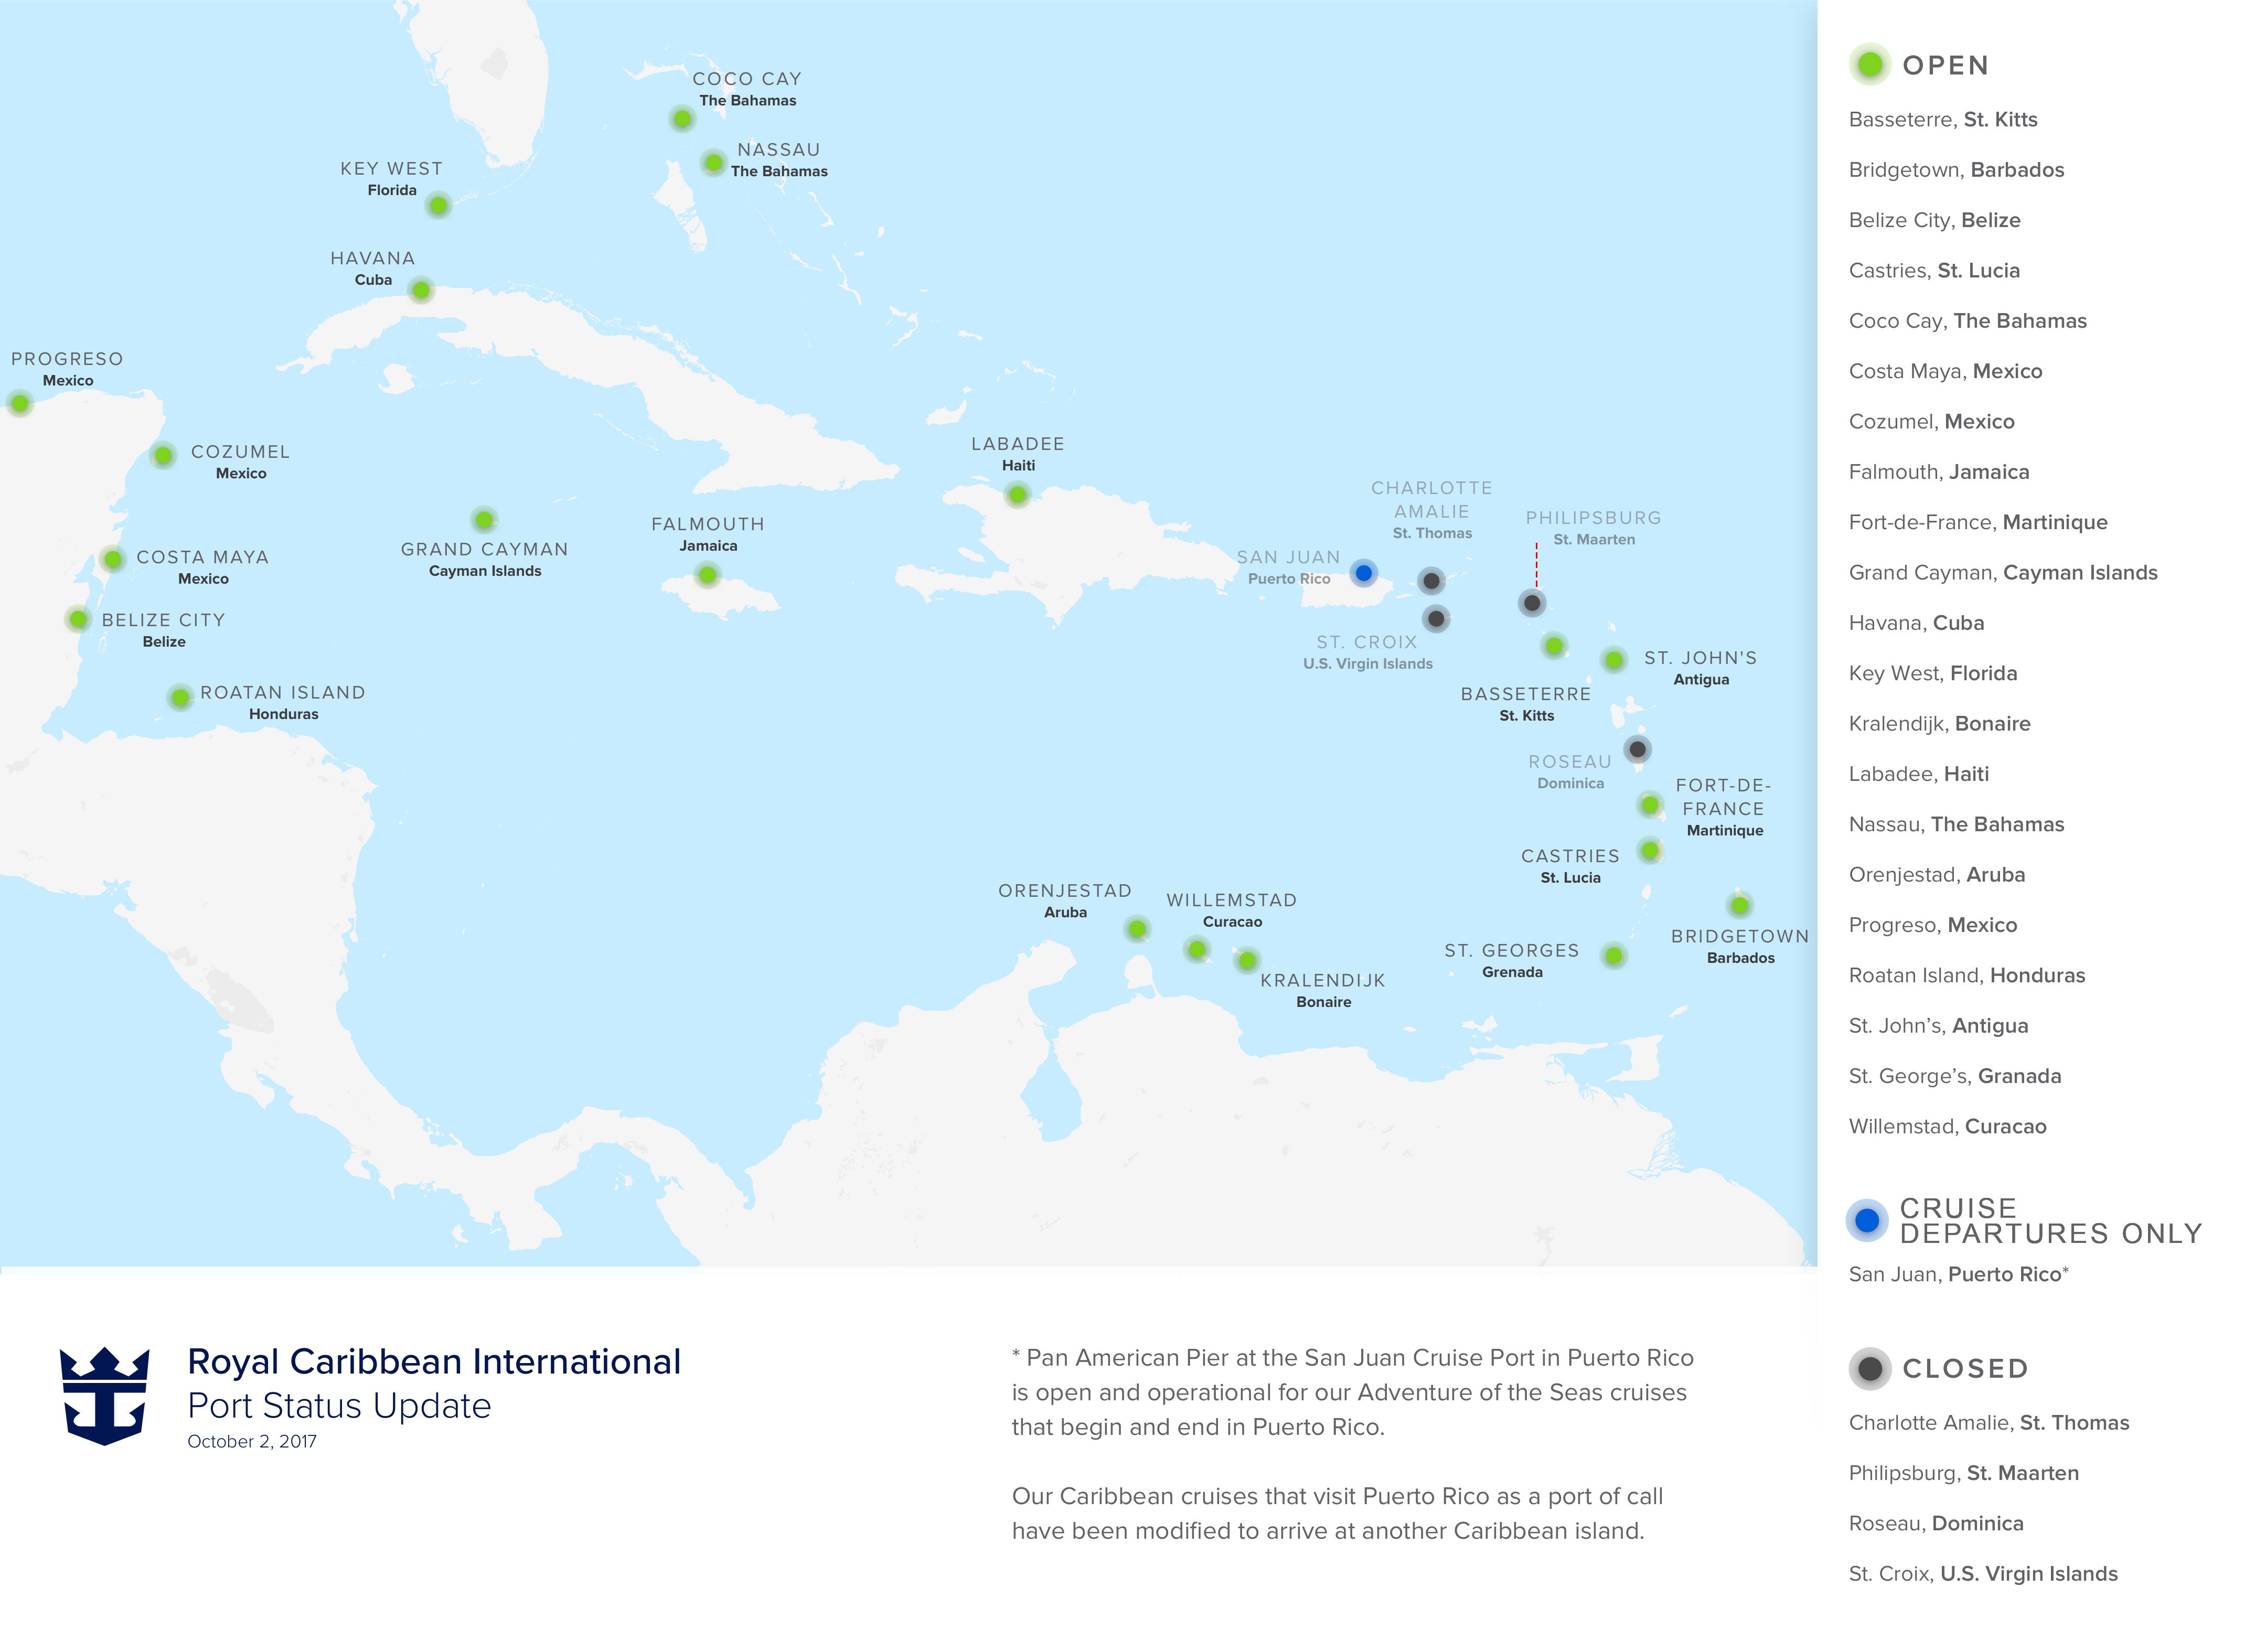 map of western caribbean cruise ports